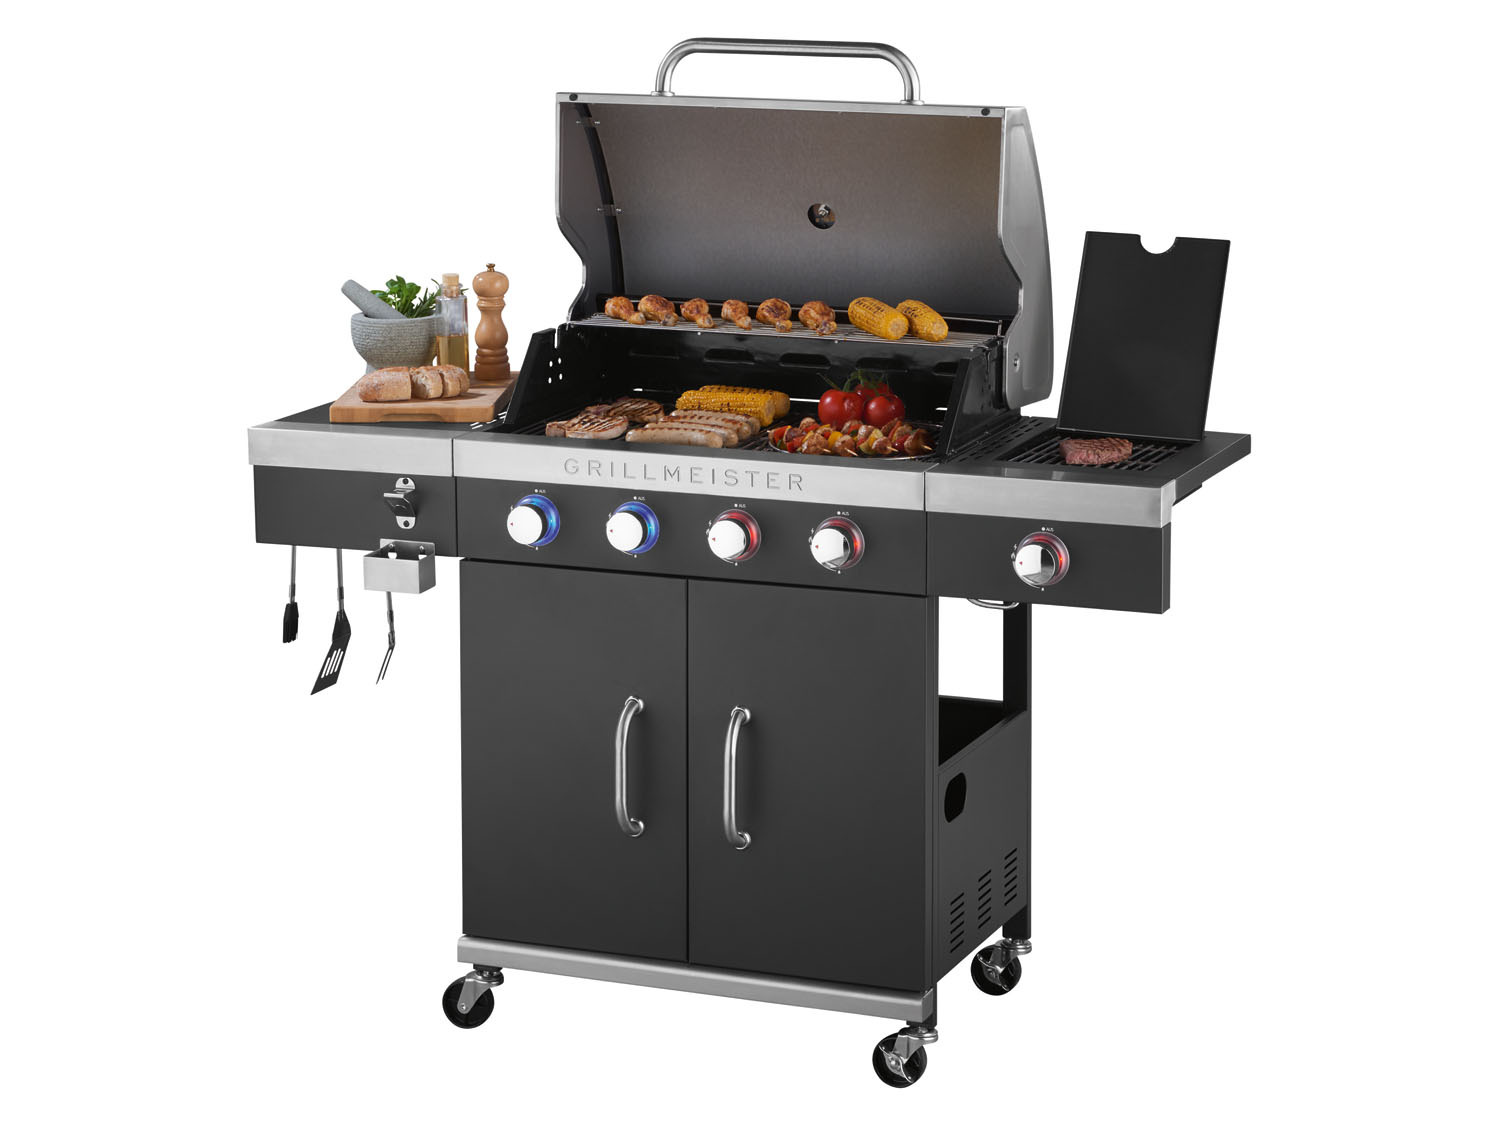 GRILLMEISTER Gasgrill, 4plus1 Brenner, 19,7 | LIDL kW